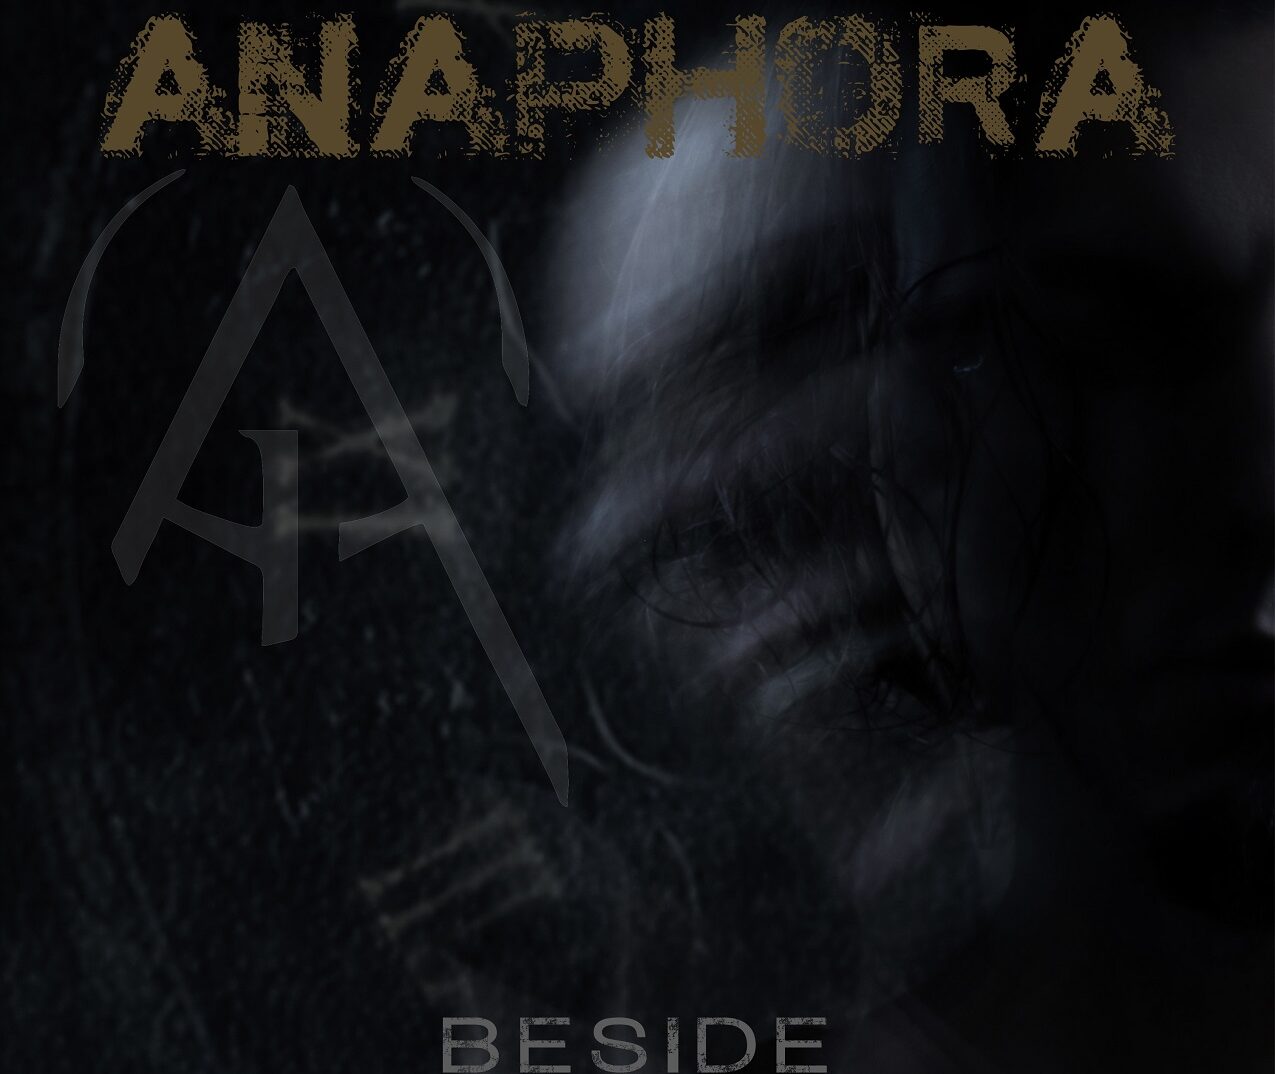 A new chapter Alternative Metal band – Anaphora